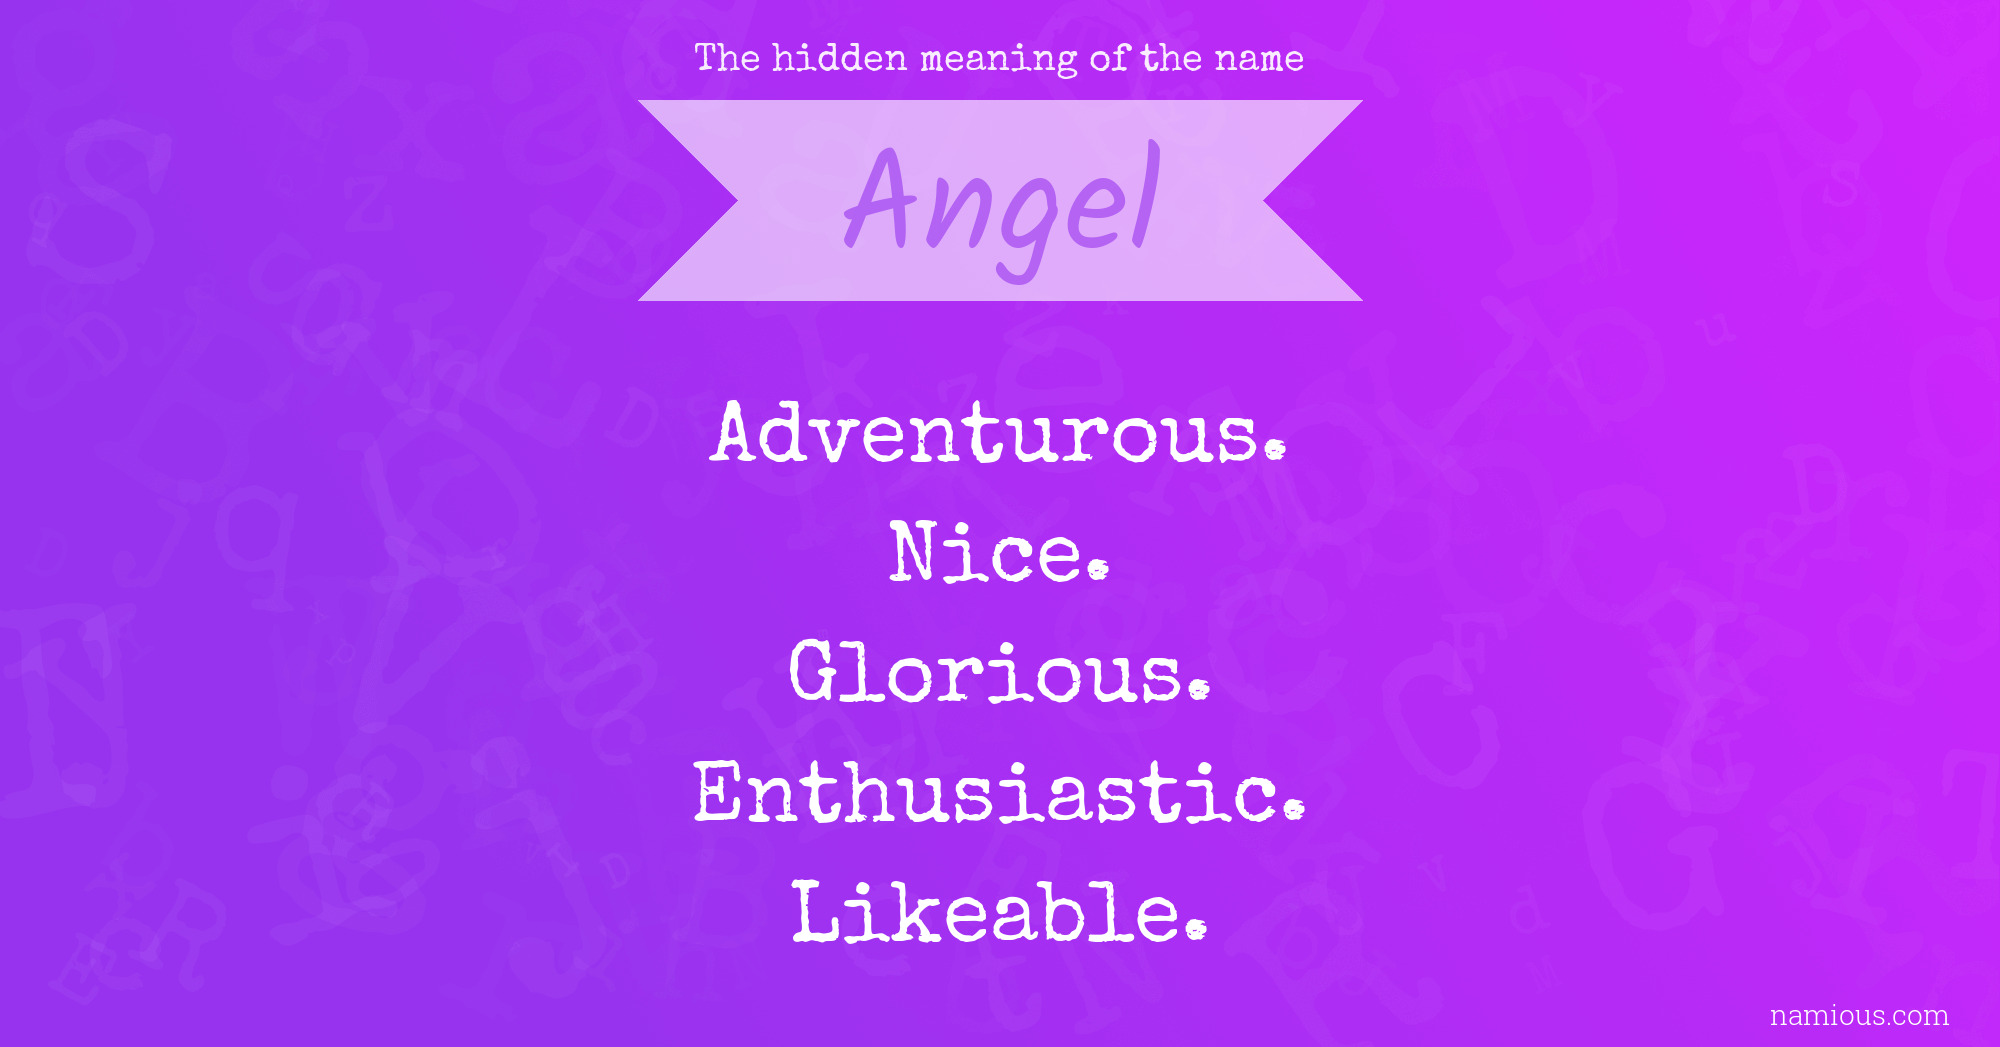 The hidden meaning of the name Angel